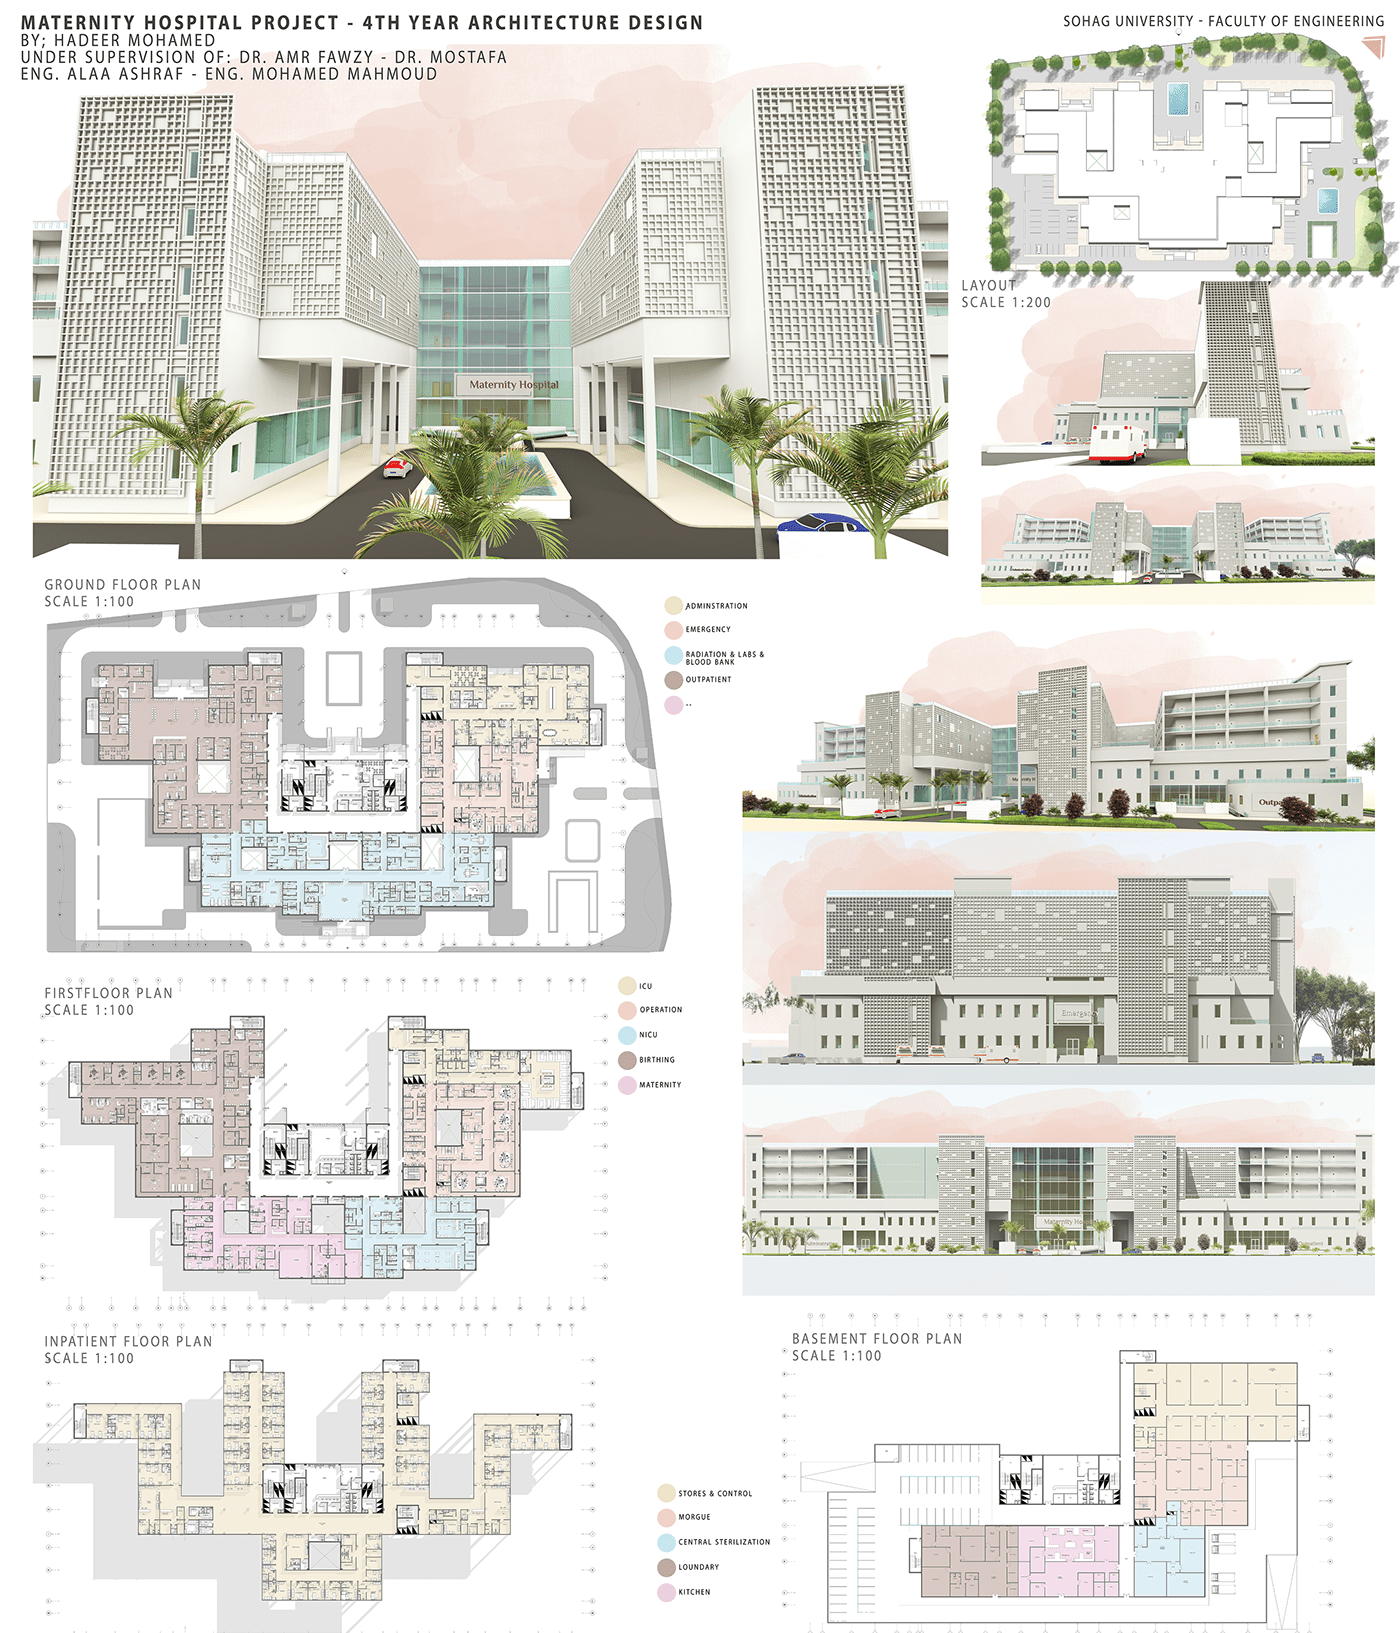 architecture exterior Render 3D visualization hospital Project design maternity general